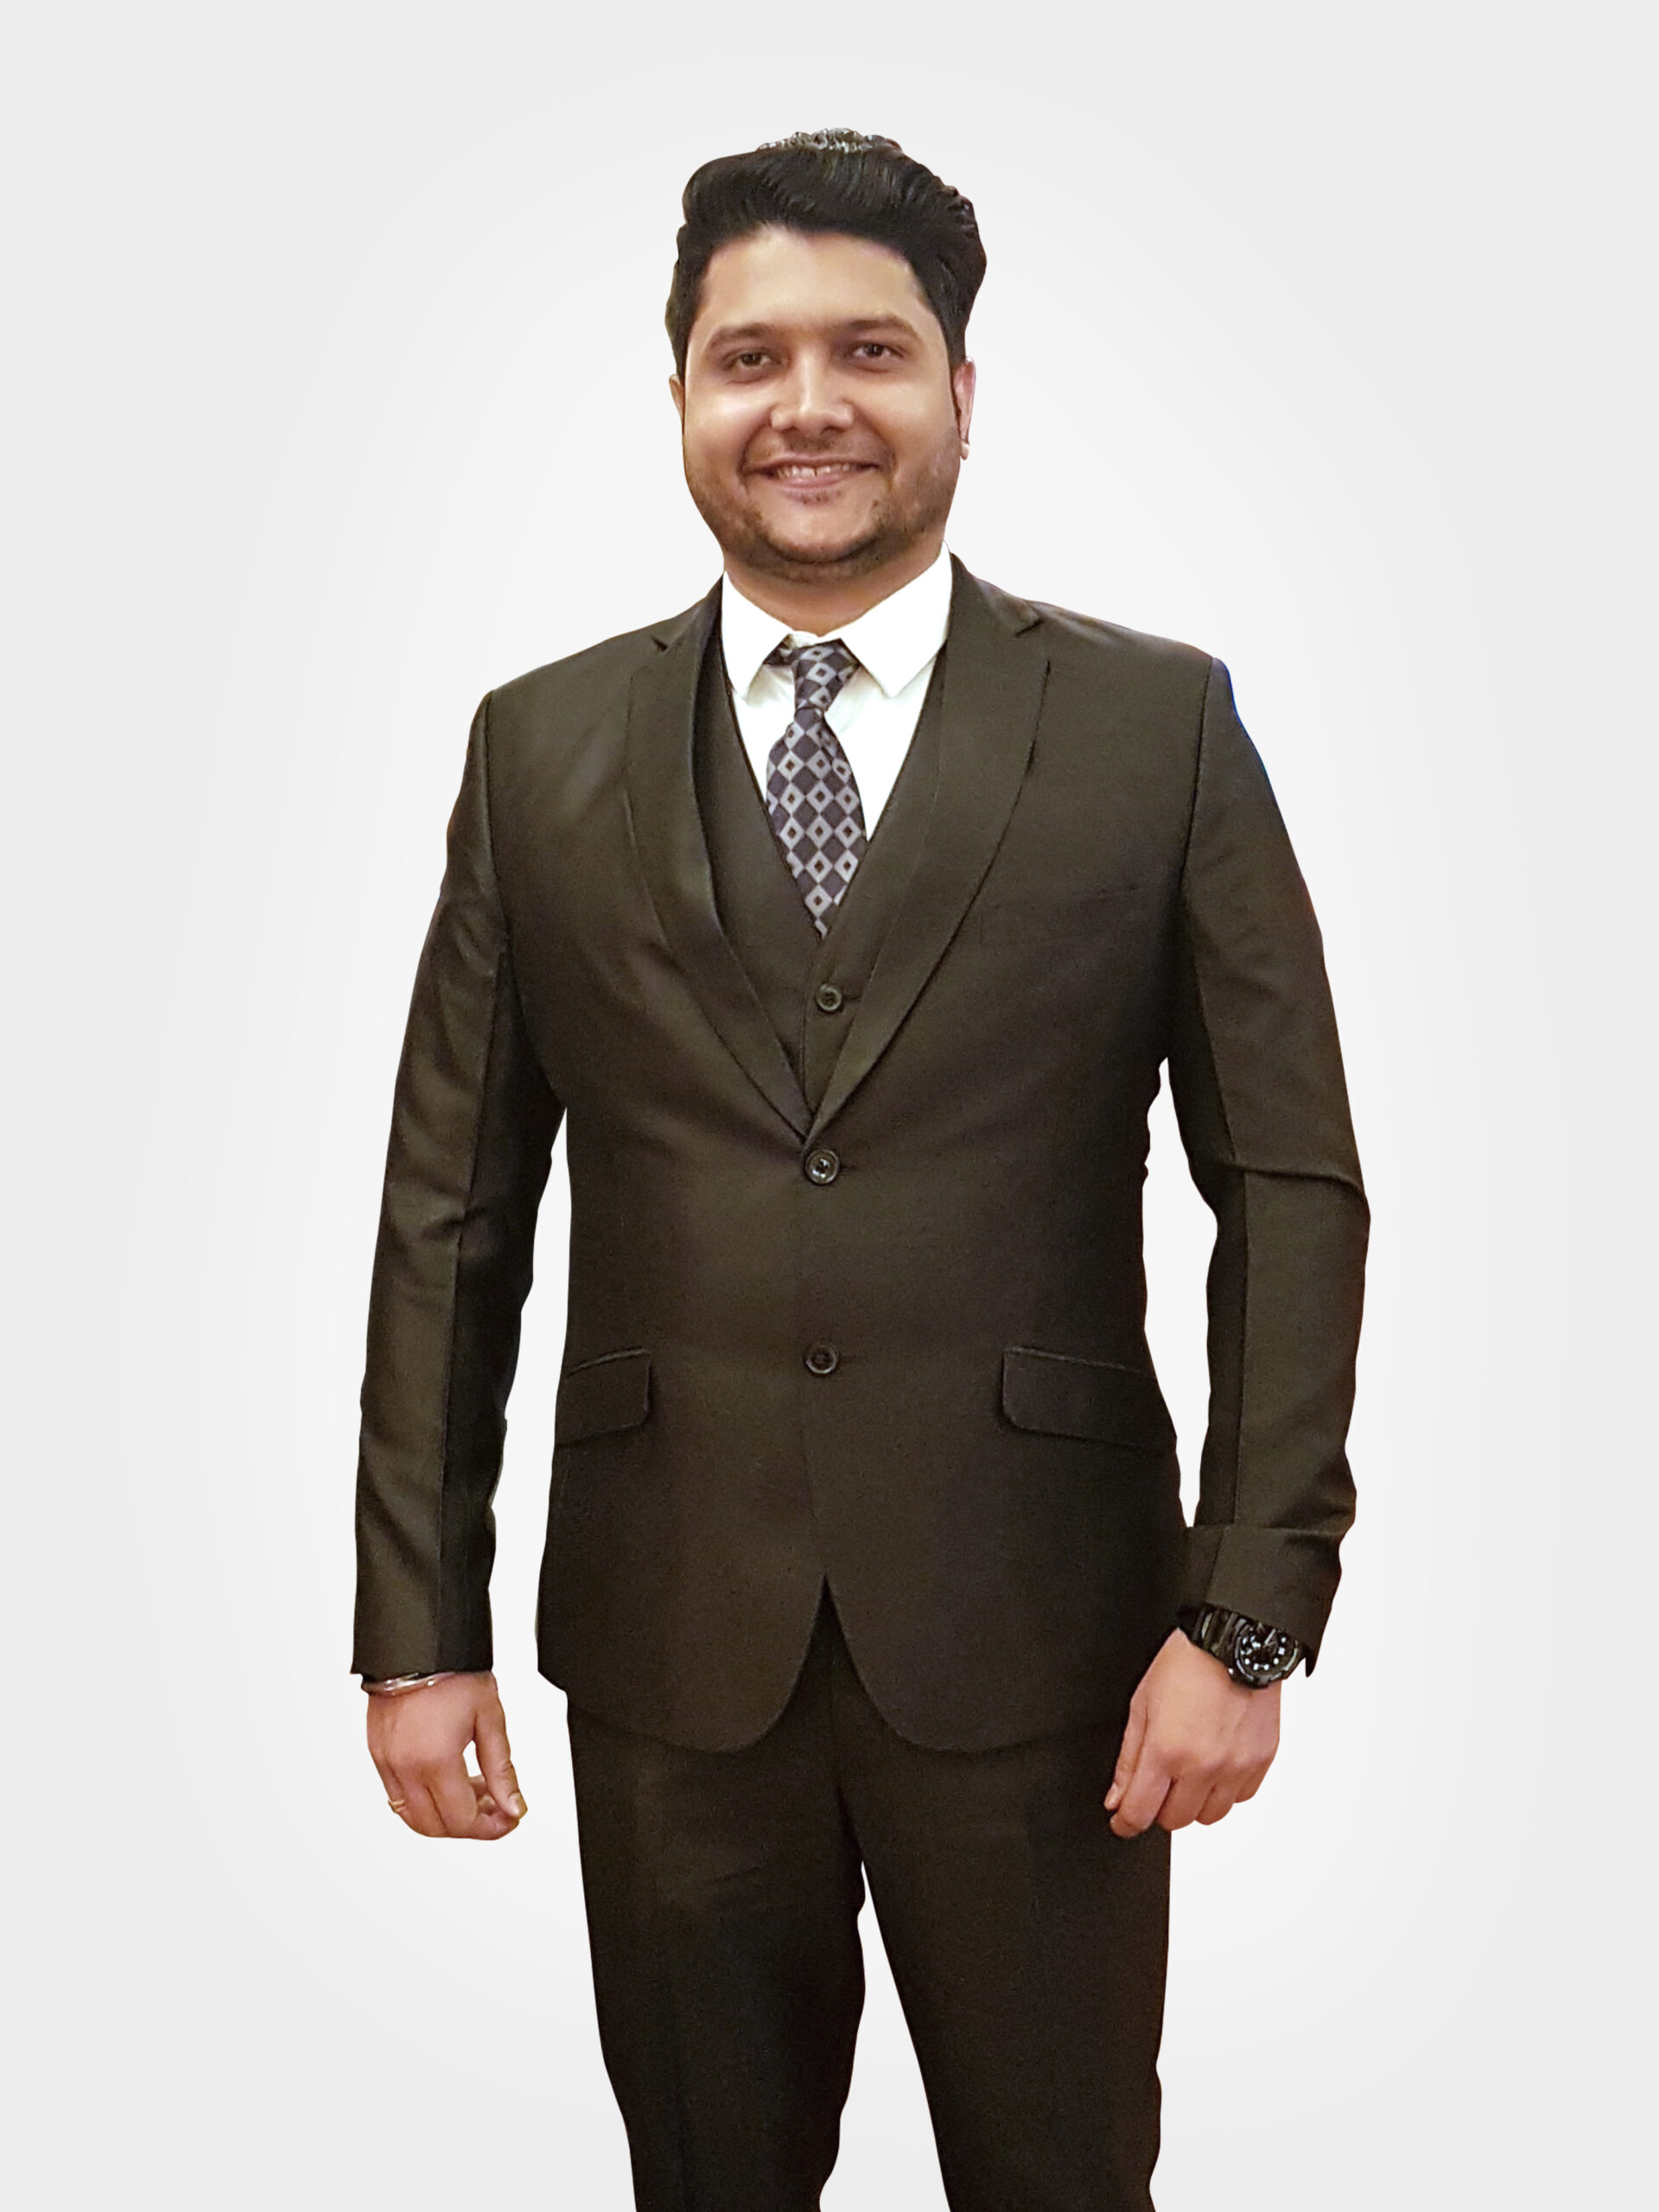 LS Digital Group Strengthens its Leadership Team by Appointing Vishal Sharma as DVP - Media Buying and Trading